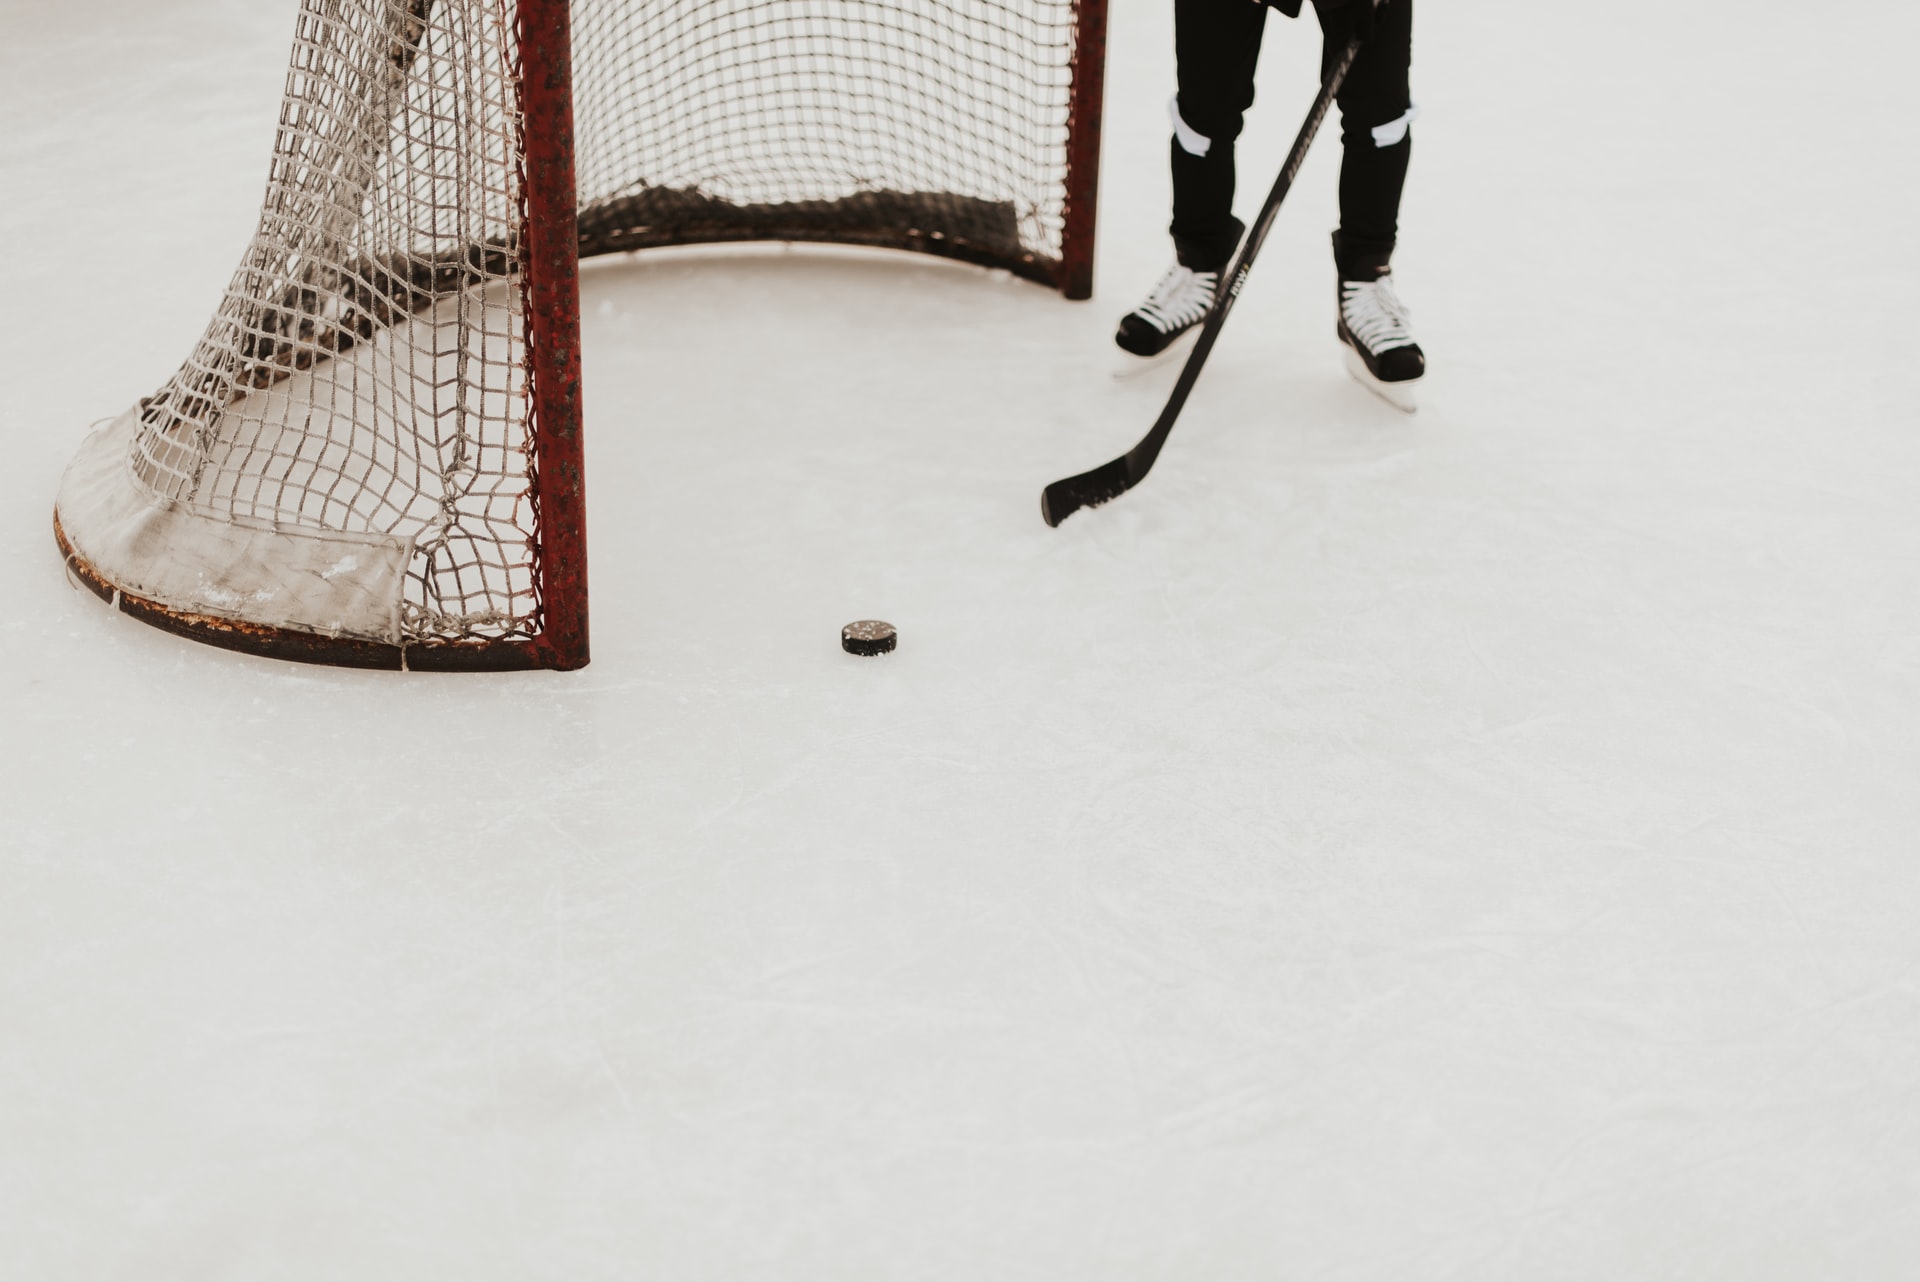 A person standing next to a hockey goal on the ice rink.